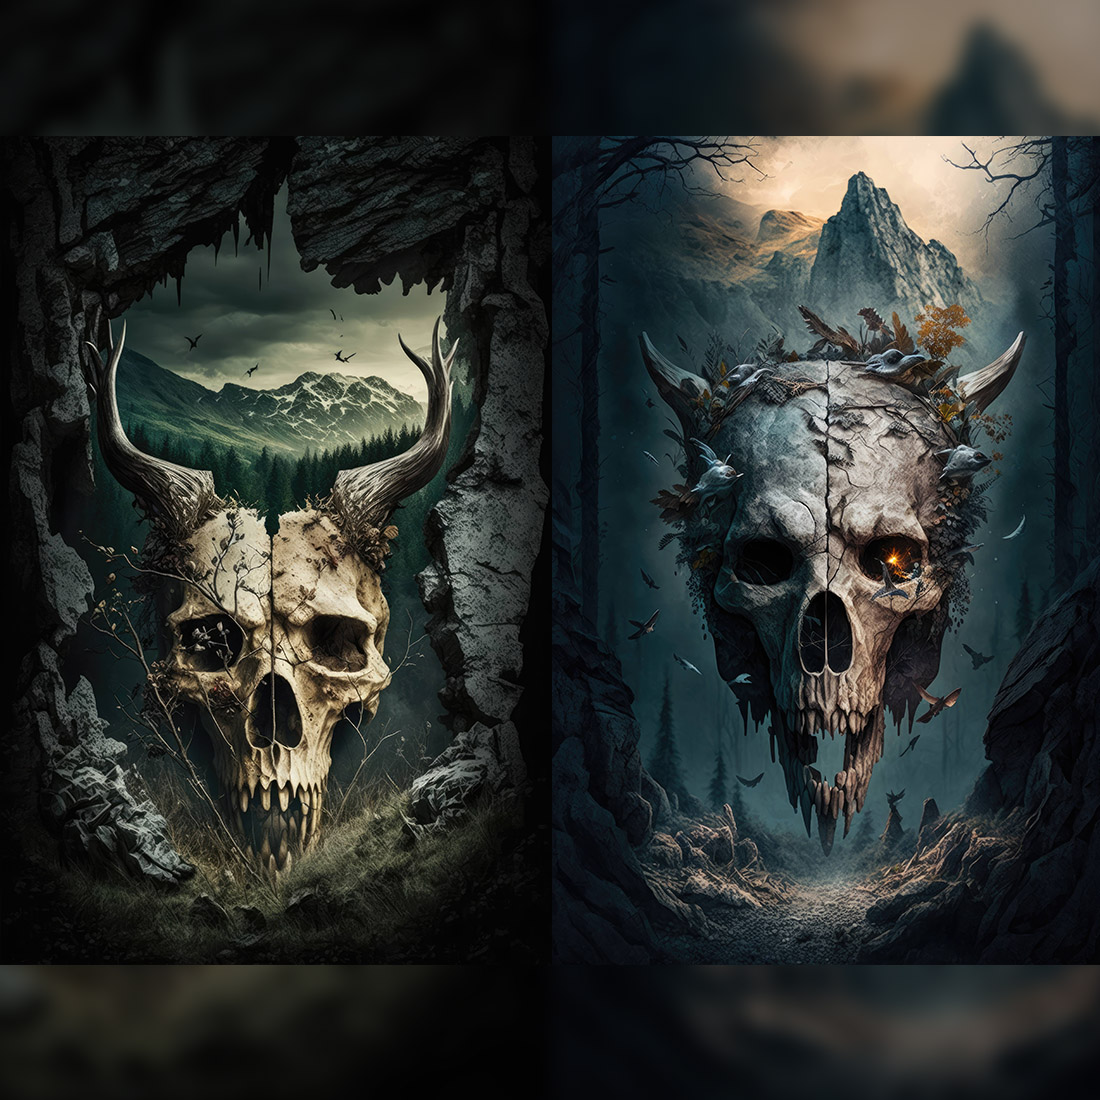 Fantasy skull in the middle cover image.